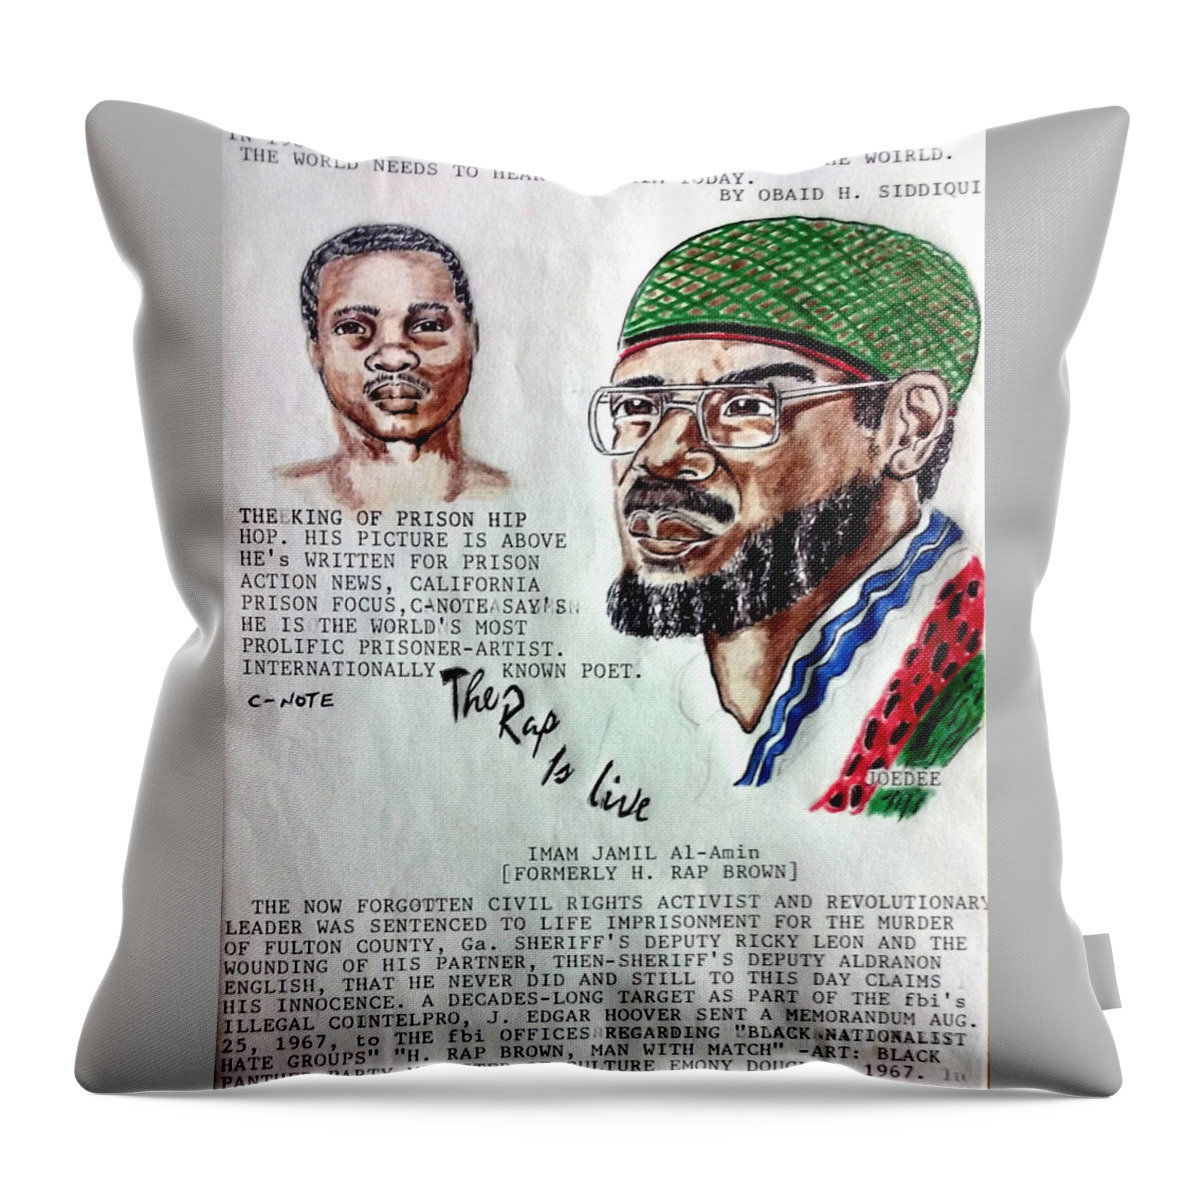 Black Art Throw Pillow featuring the drawing H. Rap Brown featuring C-Note by Joedee